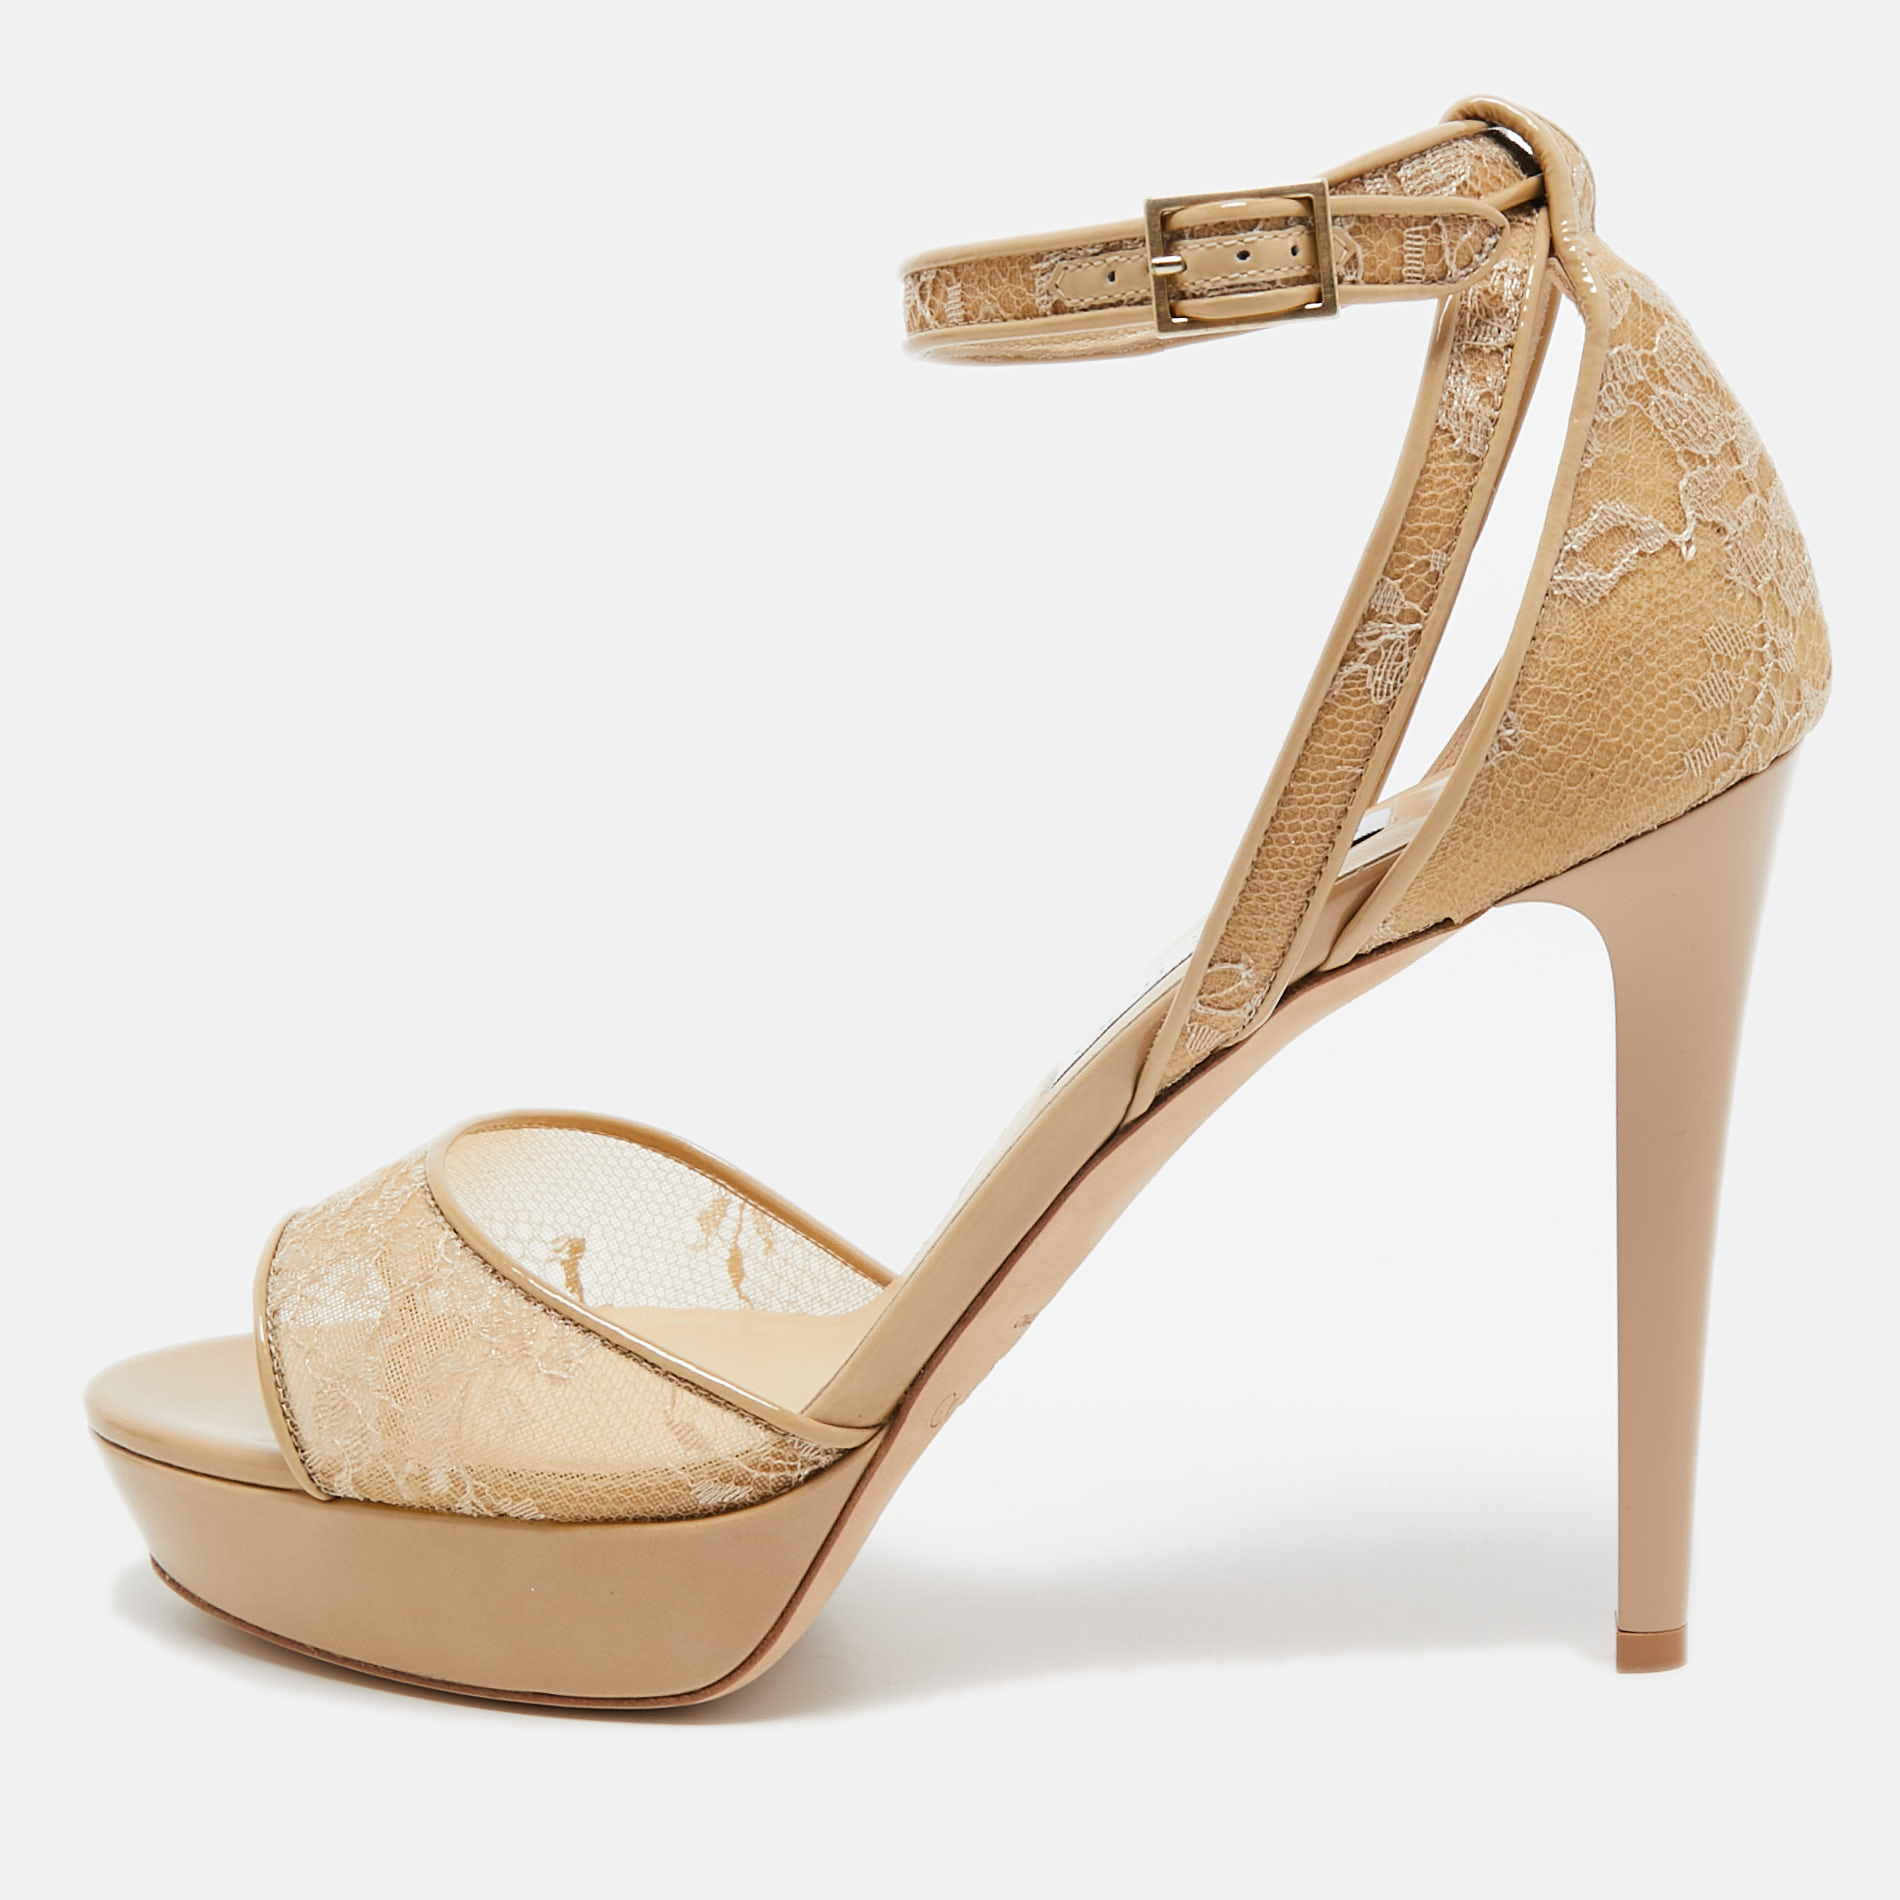 Jimmy choo beige lace and patent leather kayden ankle strap platform sandals size 41